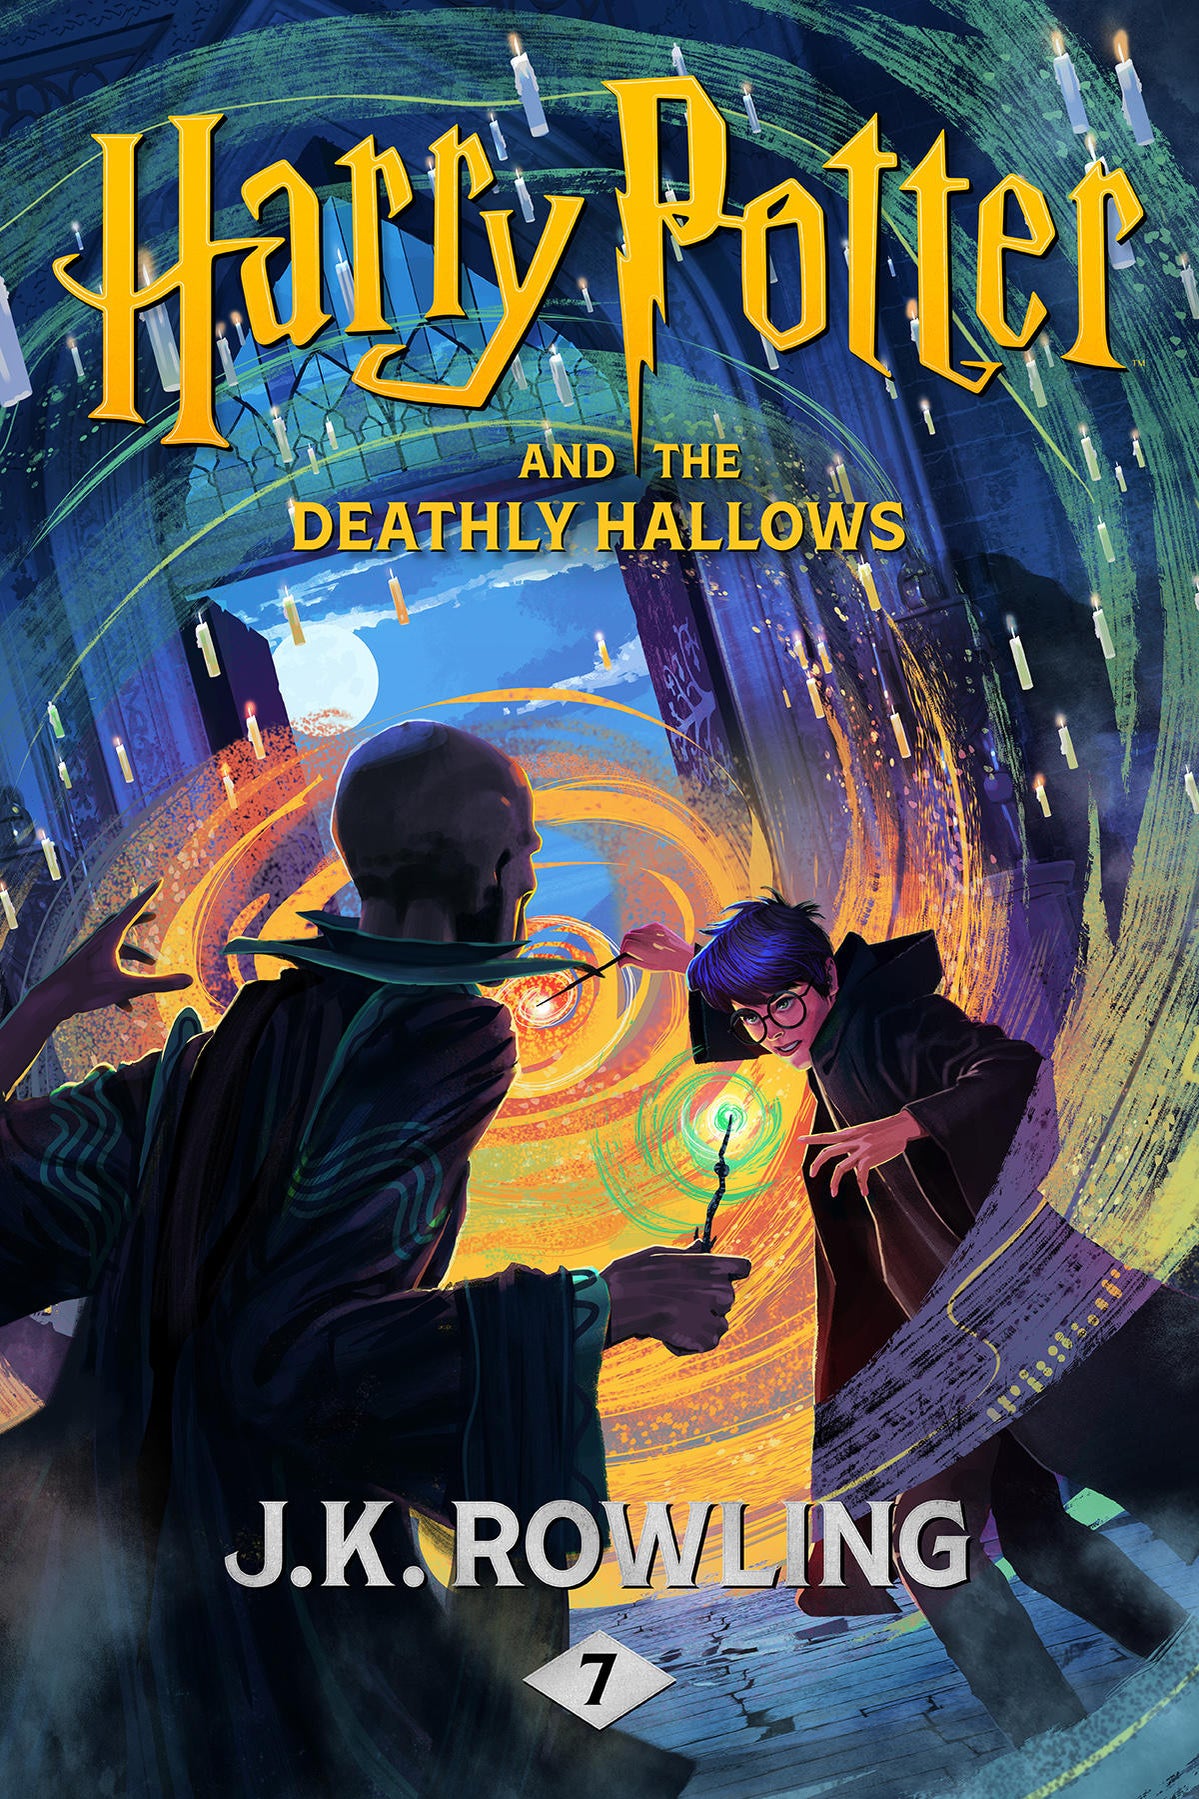 Harry Potter Books Get New Covers